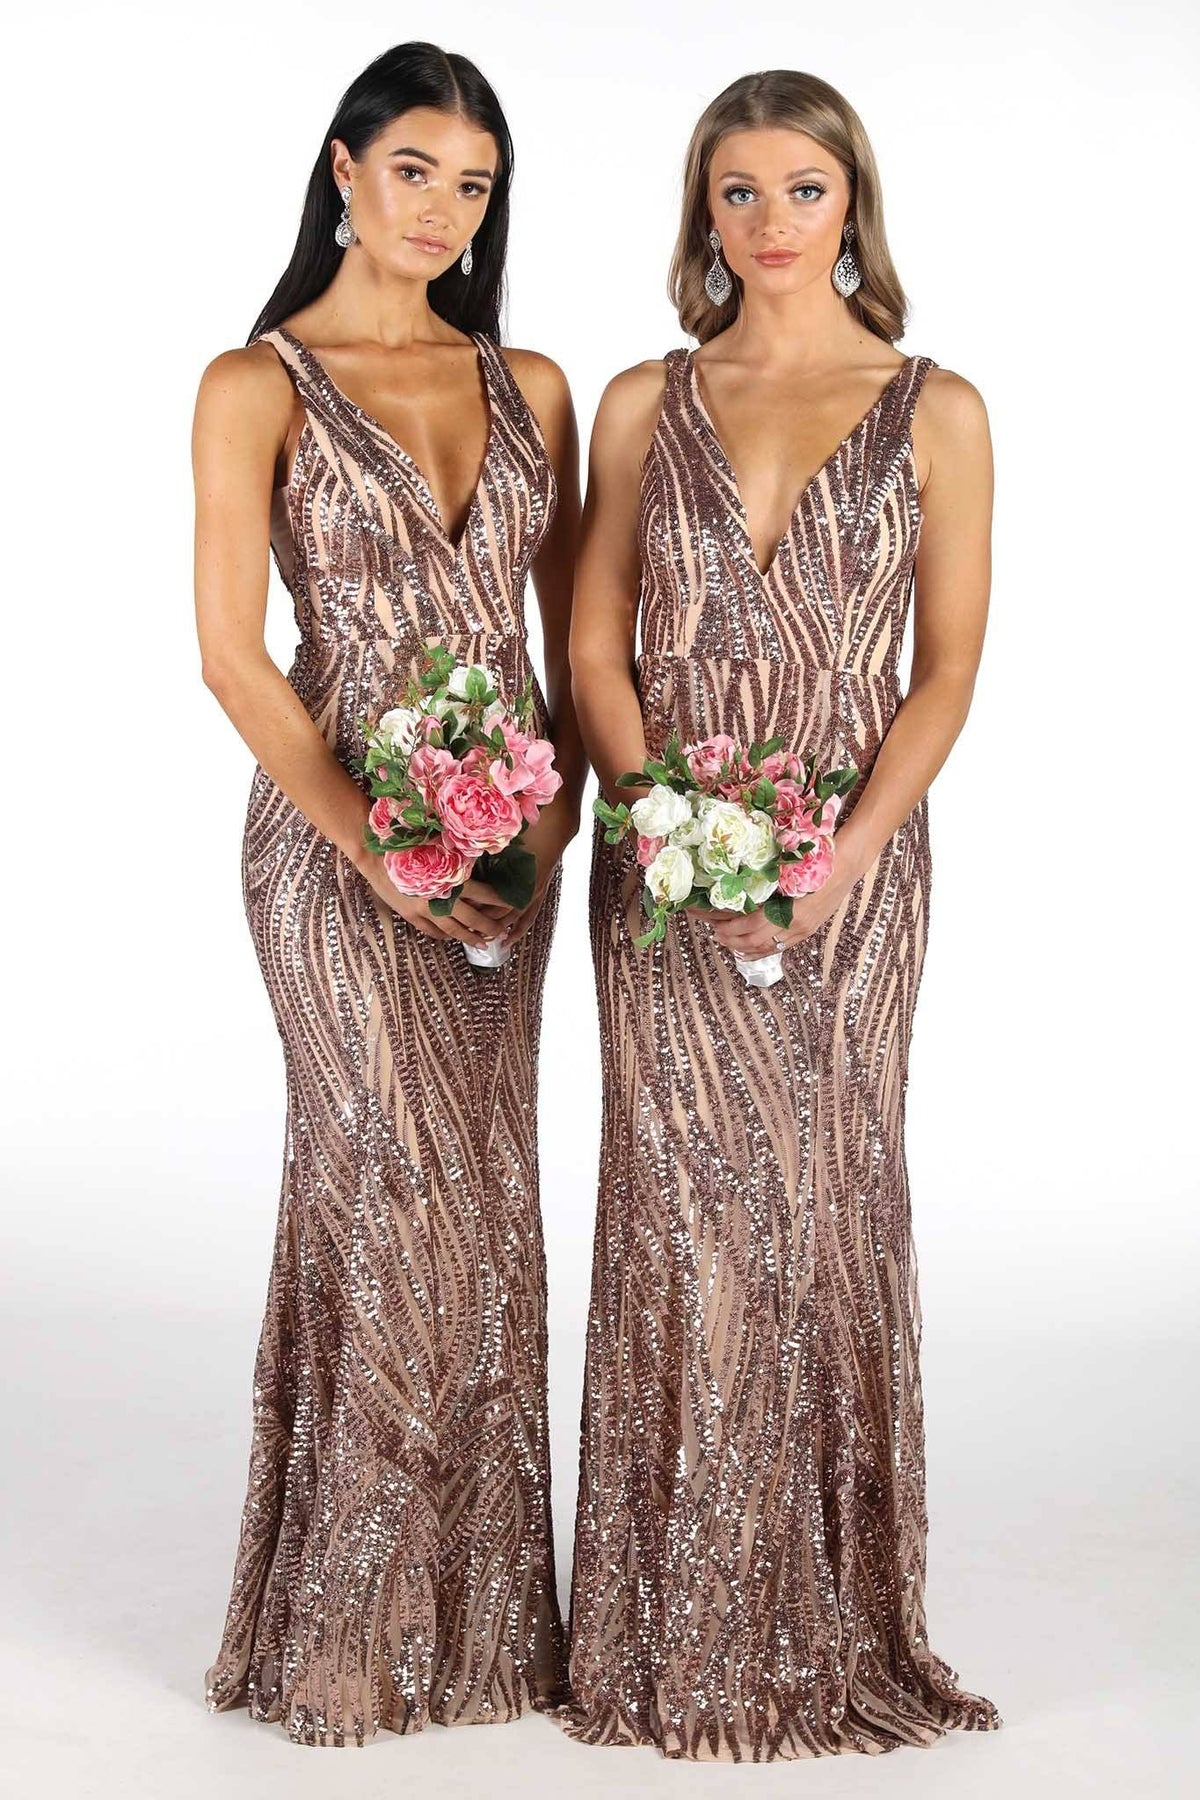 Bridesmaids in Shiny Sequin Floor Length Gown with Wavy Stripes of Rose Gold Embroidered Sequins, V Plunge Neckline and Open Back Design